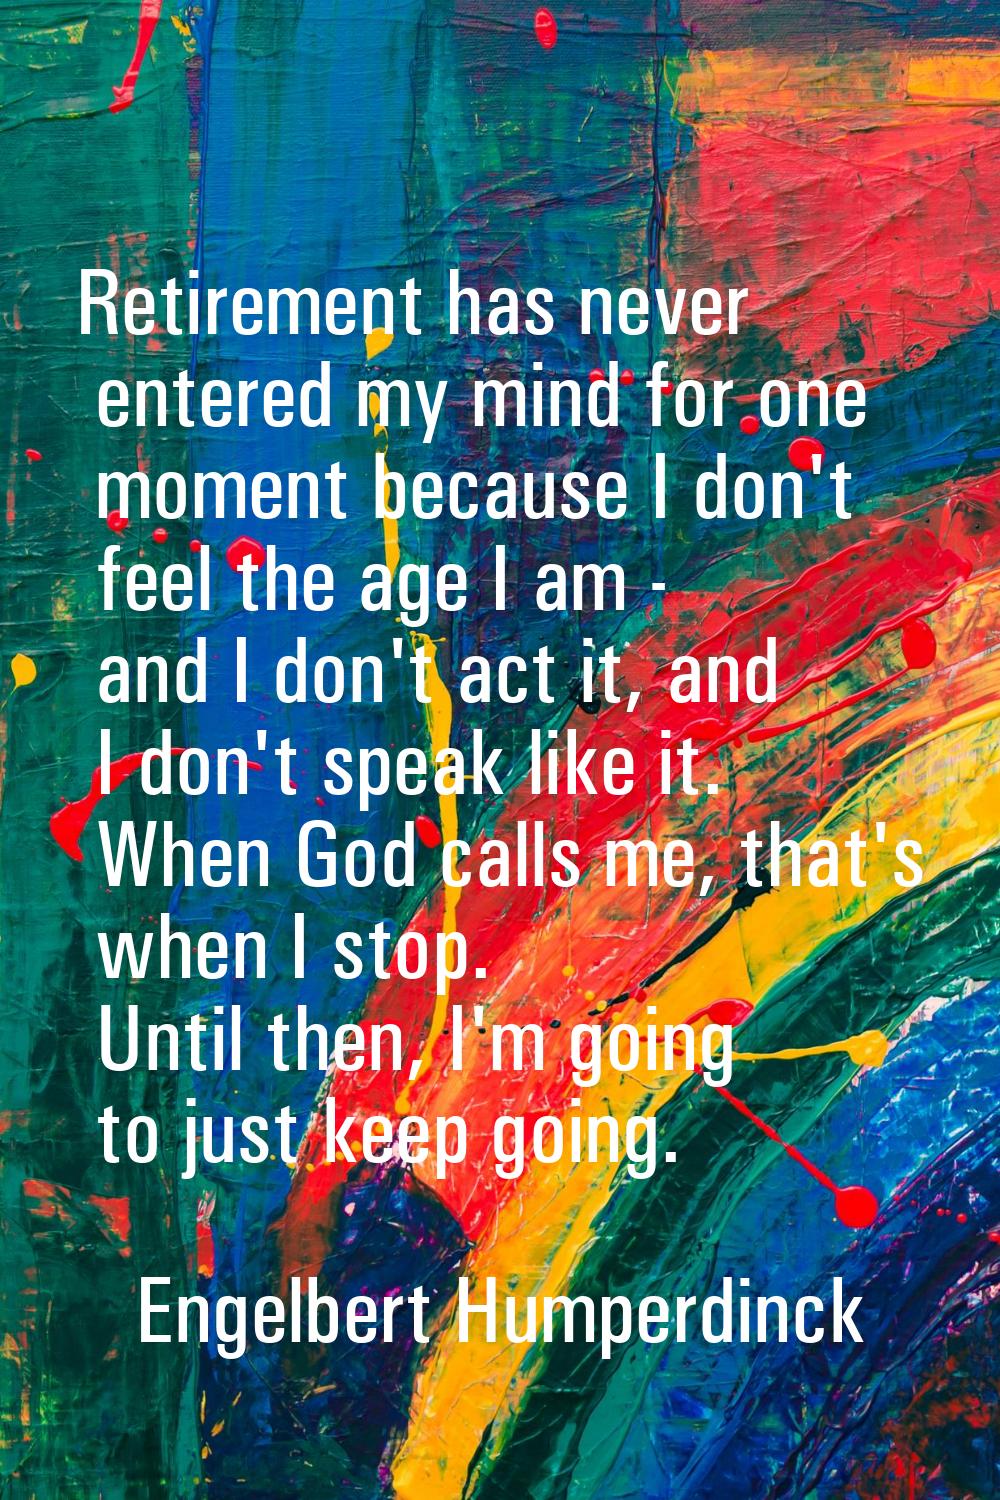 Retirement has never entered my mind for one moment because I don't feel the age I am - and I don't